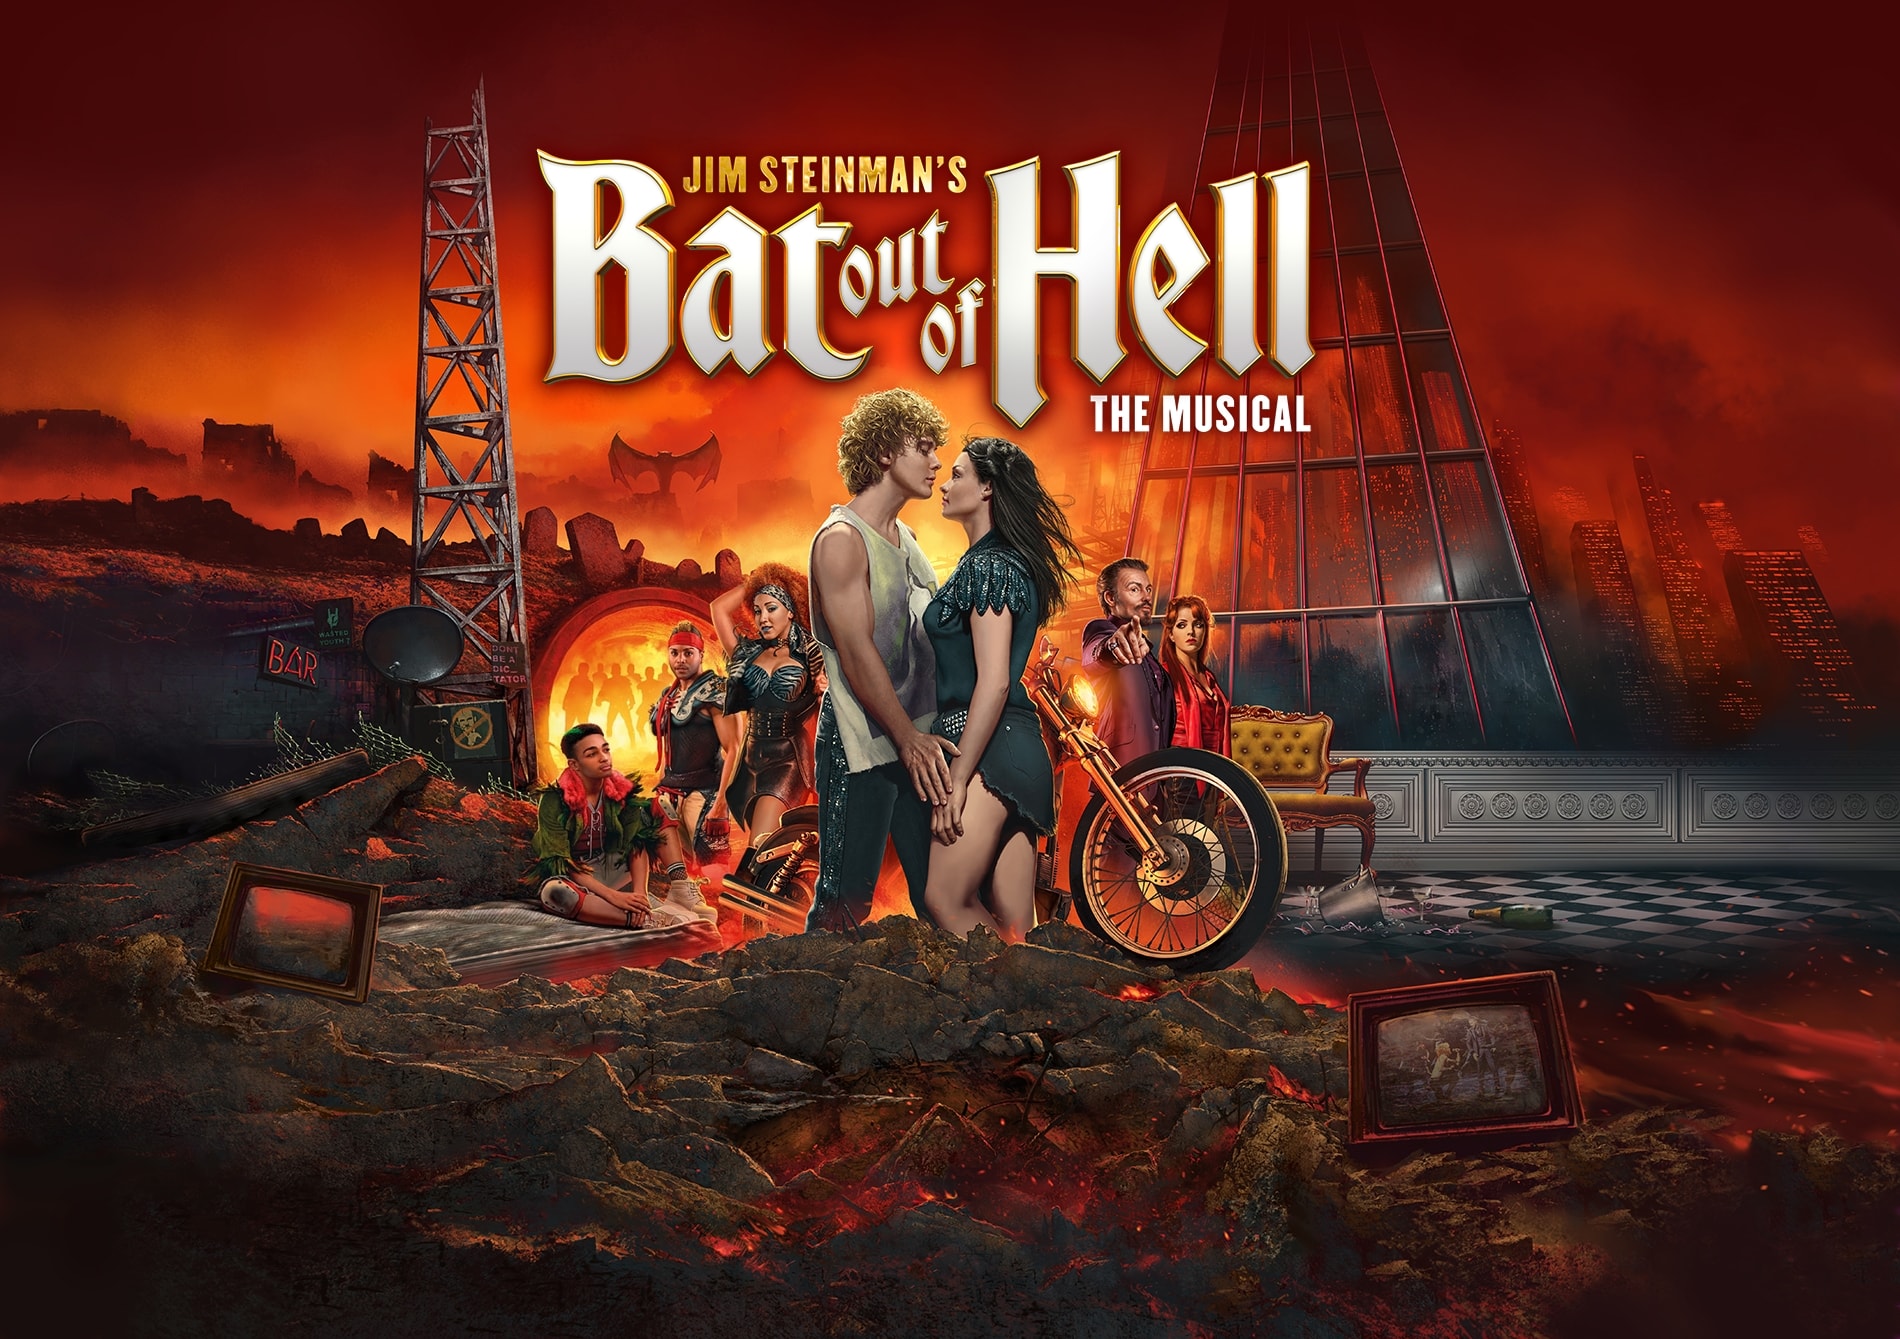 Jim Steinman's Bat Out Of Hell The Musical at the Dominion Theatre, London until 5th January 2019